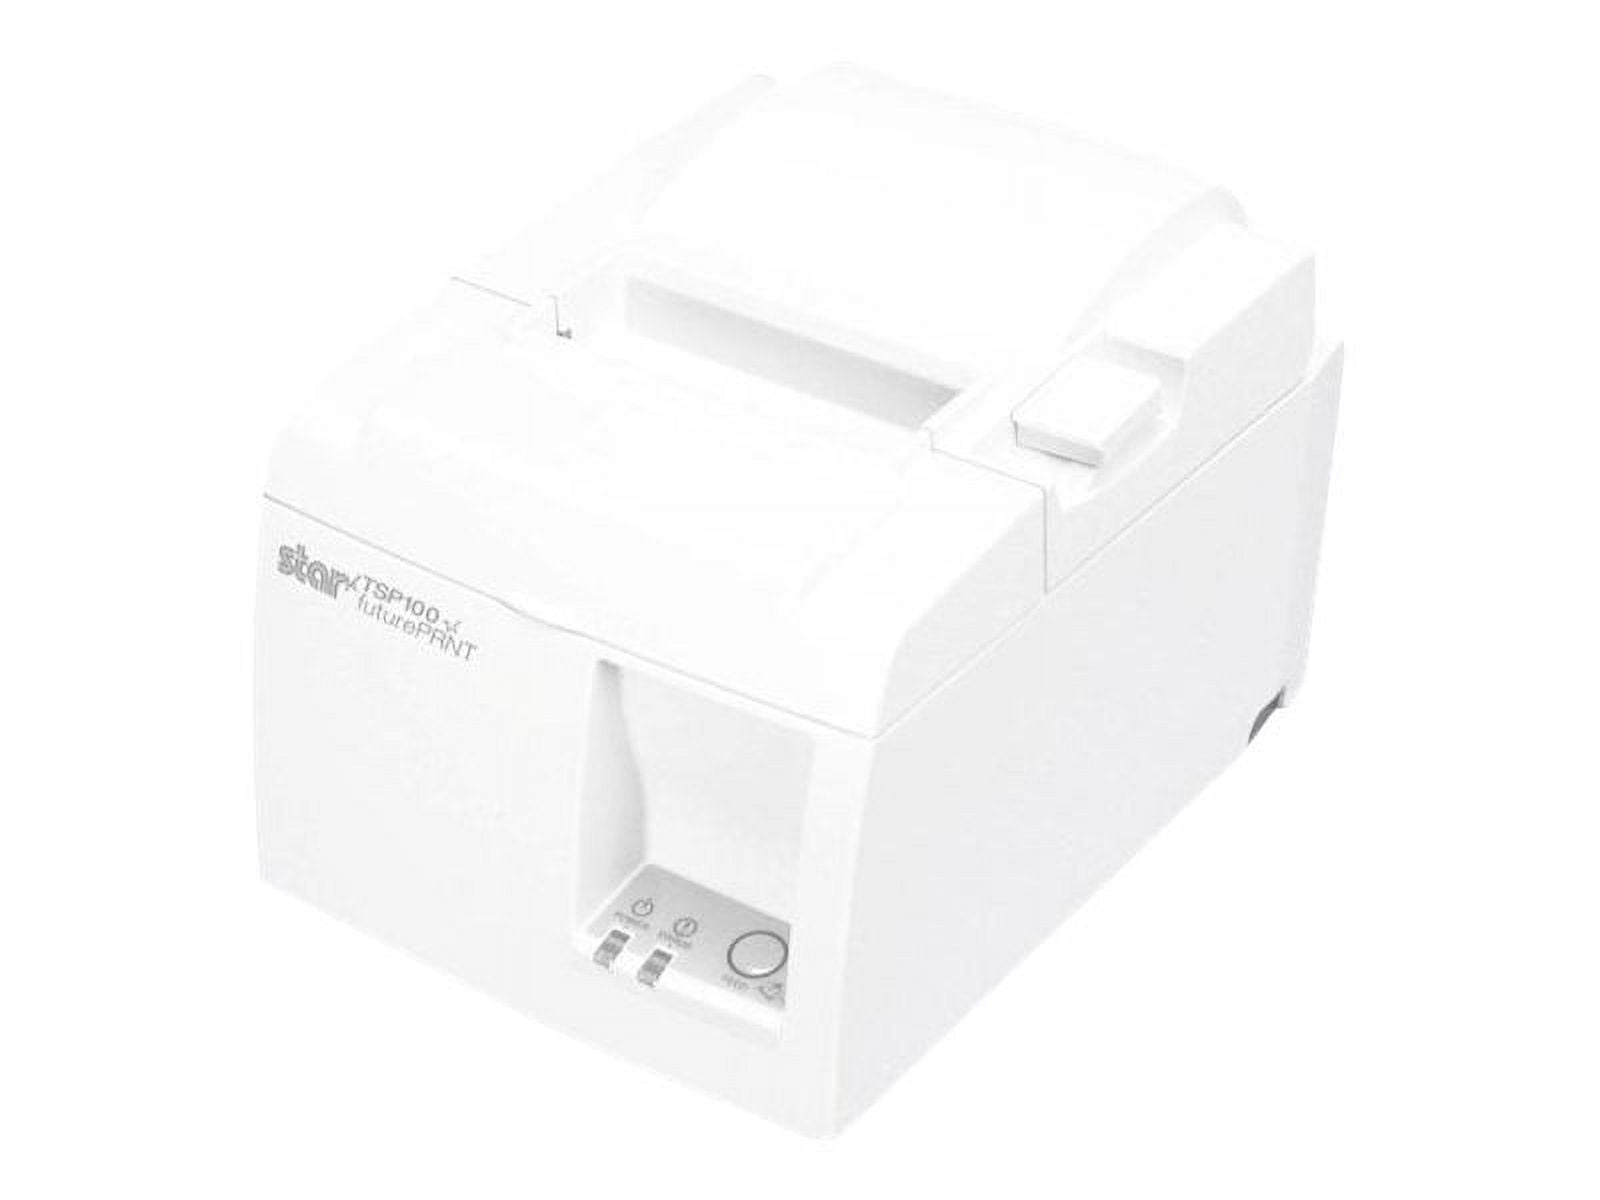 Imprimante Star TSP847II, AirPrint, 8 pts mm (203 dpi), massicot. Couleur  blanc